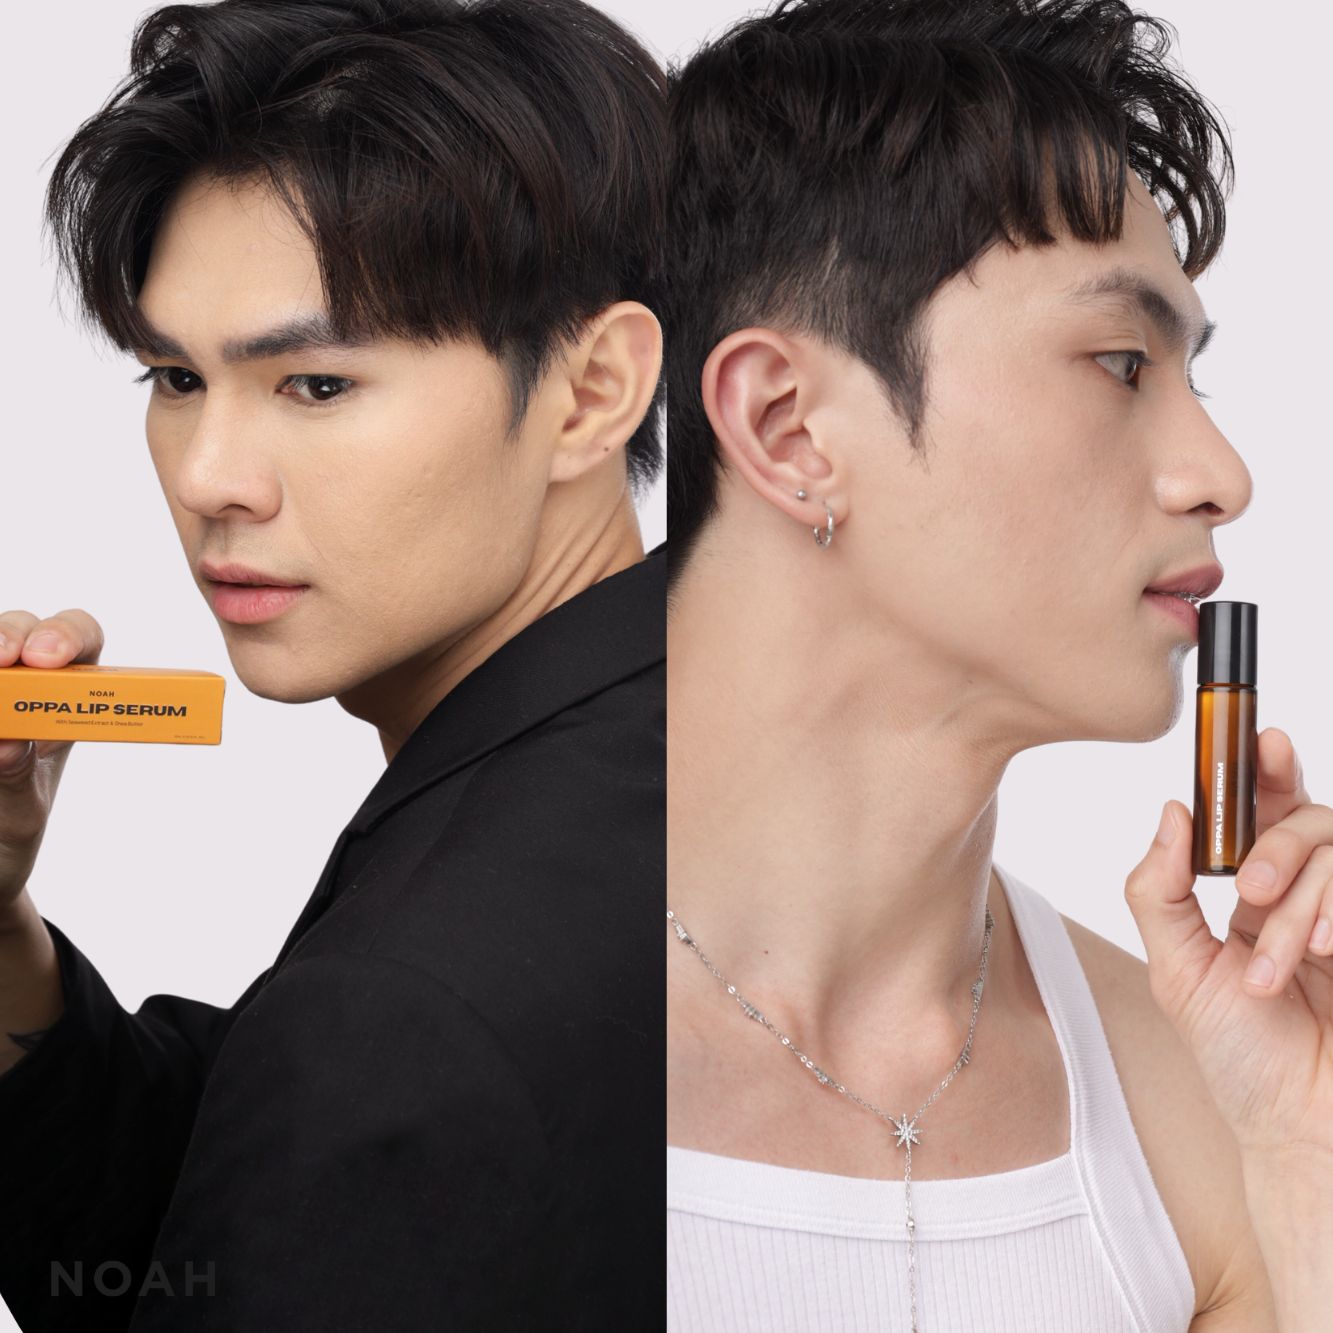 Noah Oppa Lips Serum (Hydrating, Buildable Tint, Heals Chapped Lips, Fragrance-Free)